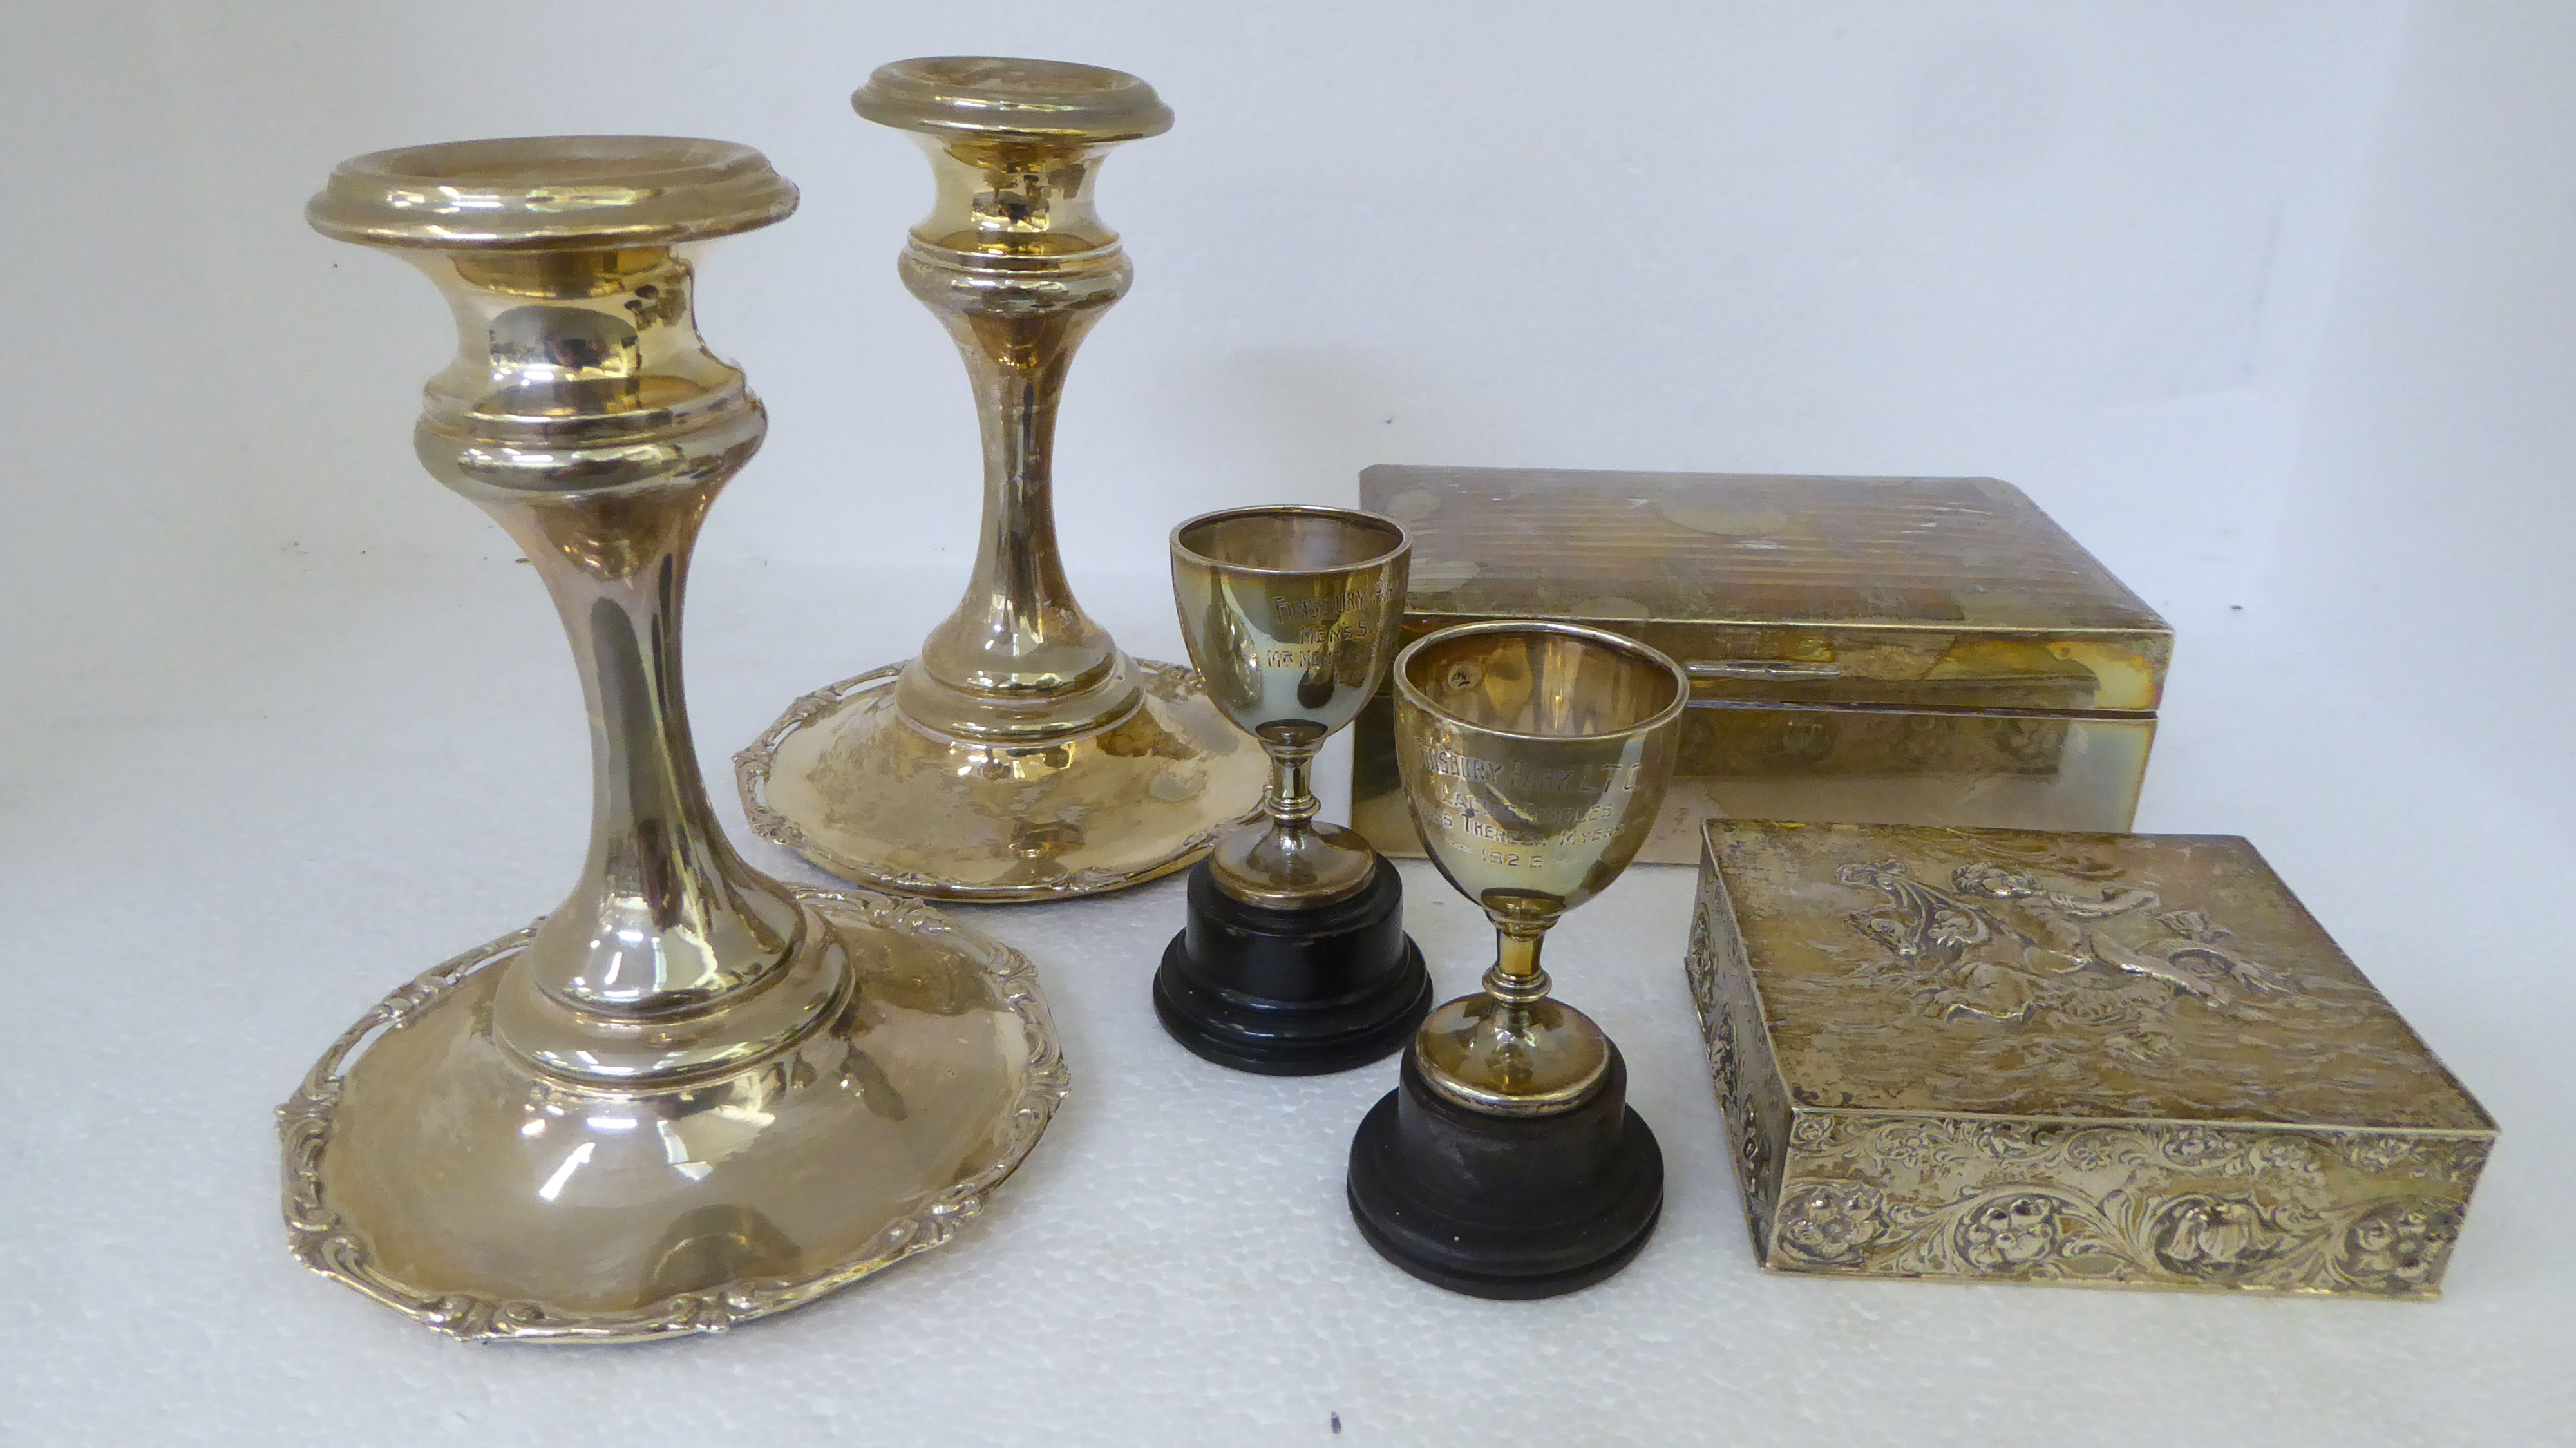 Silver and white metal collectables: to include a pair of candlesticks  5"h; a cigarette box; and